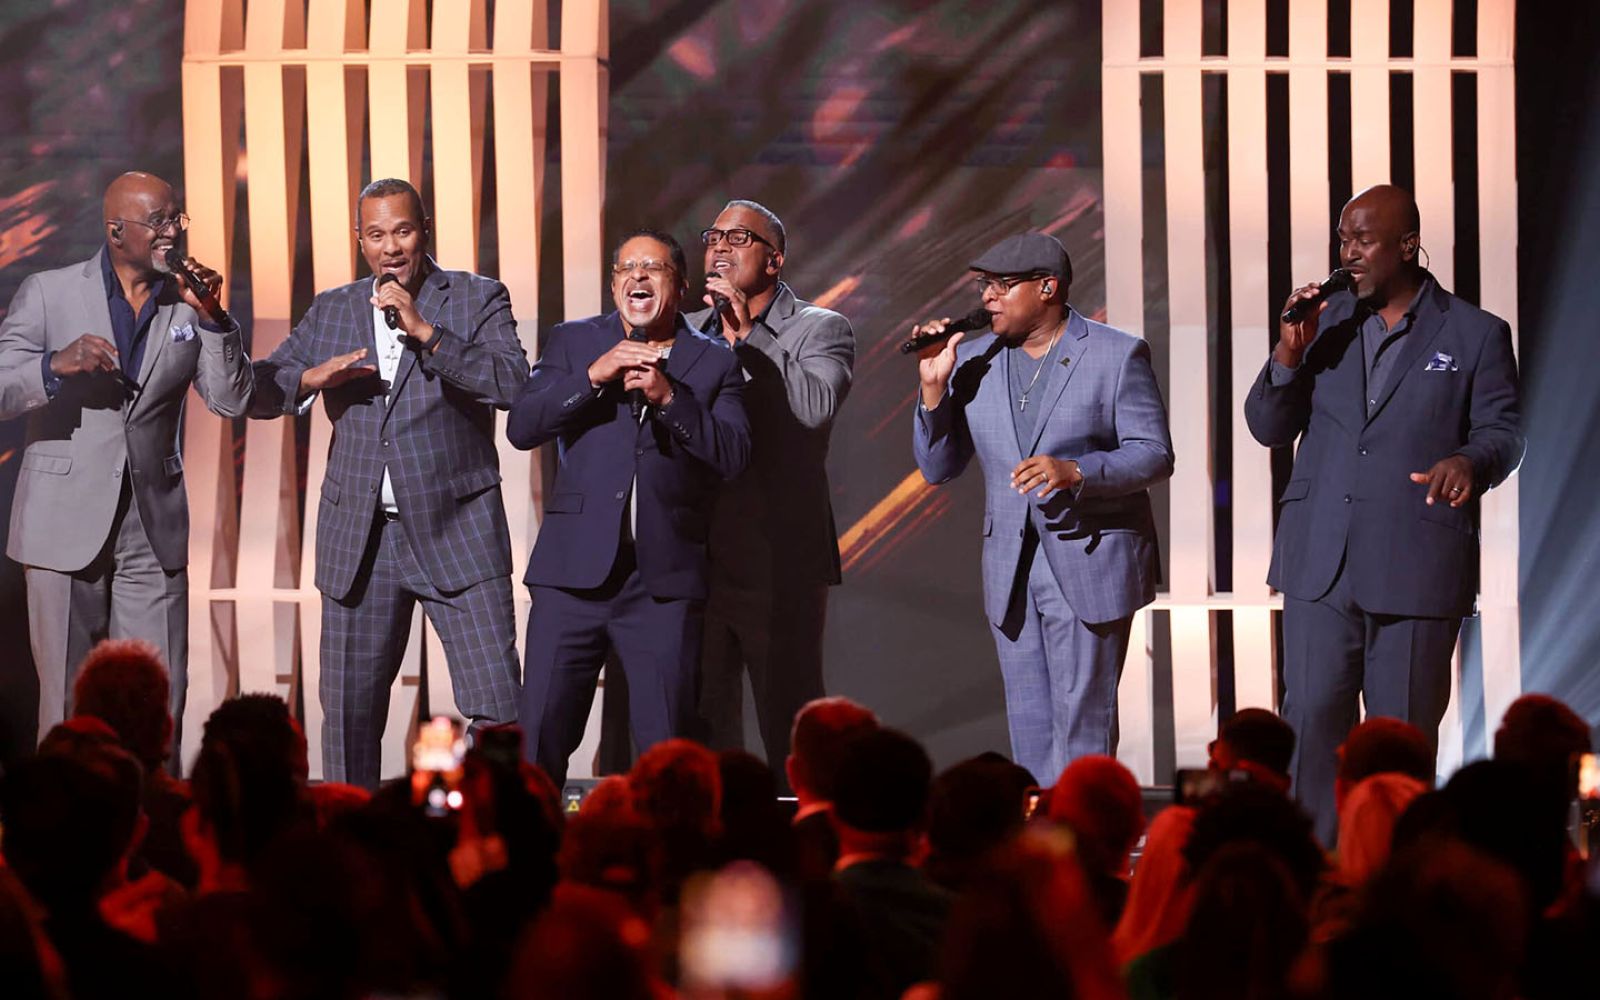 Take 6, shown performing at The Dove Awards, will be at The Clyde Theatre on Friday, April 26.